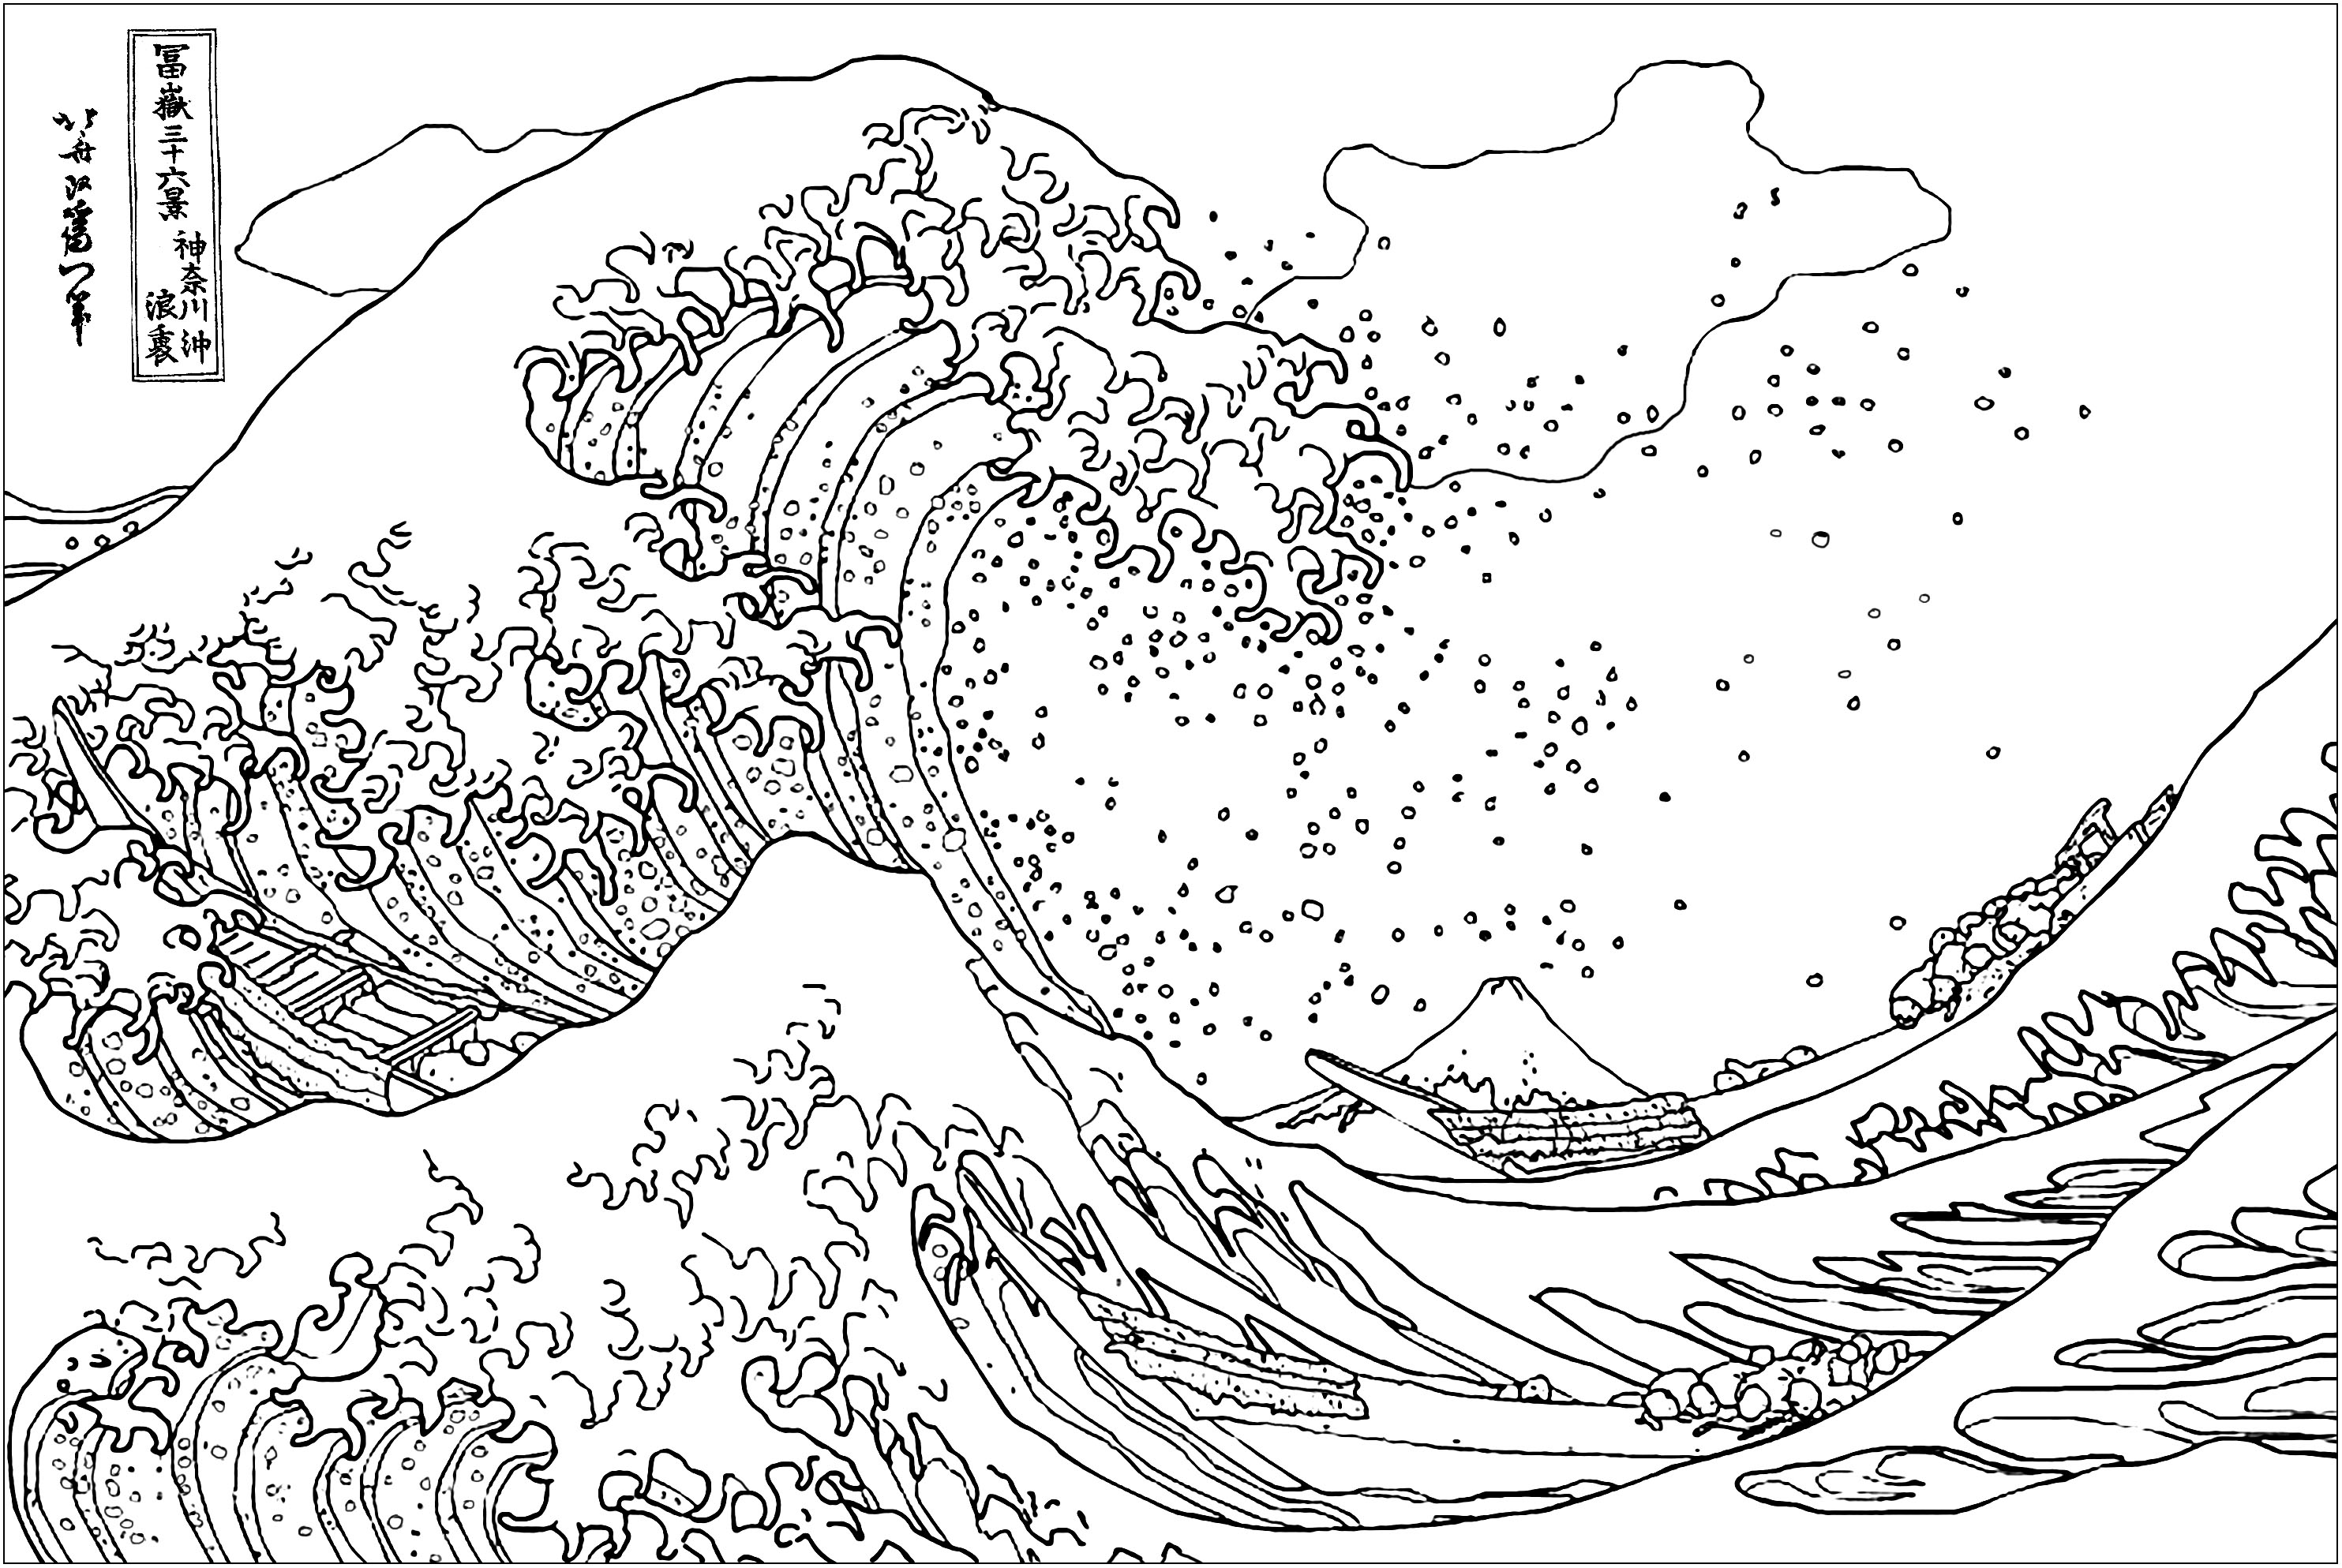 Coloring page inspired by this very famous woodblock print by the Japanese ukiyo-e artist Hokusai